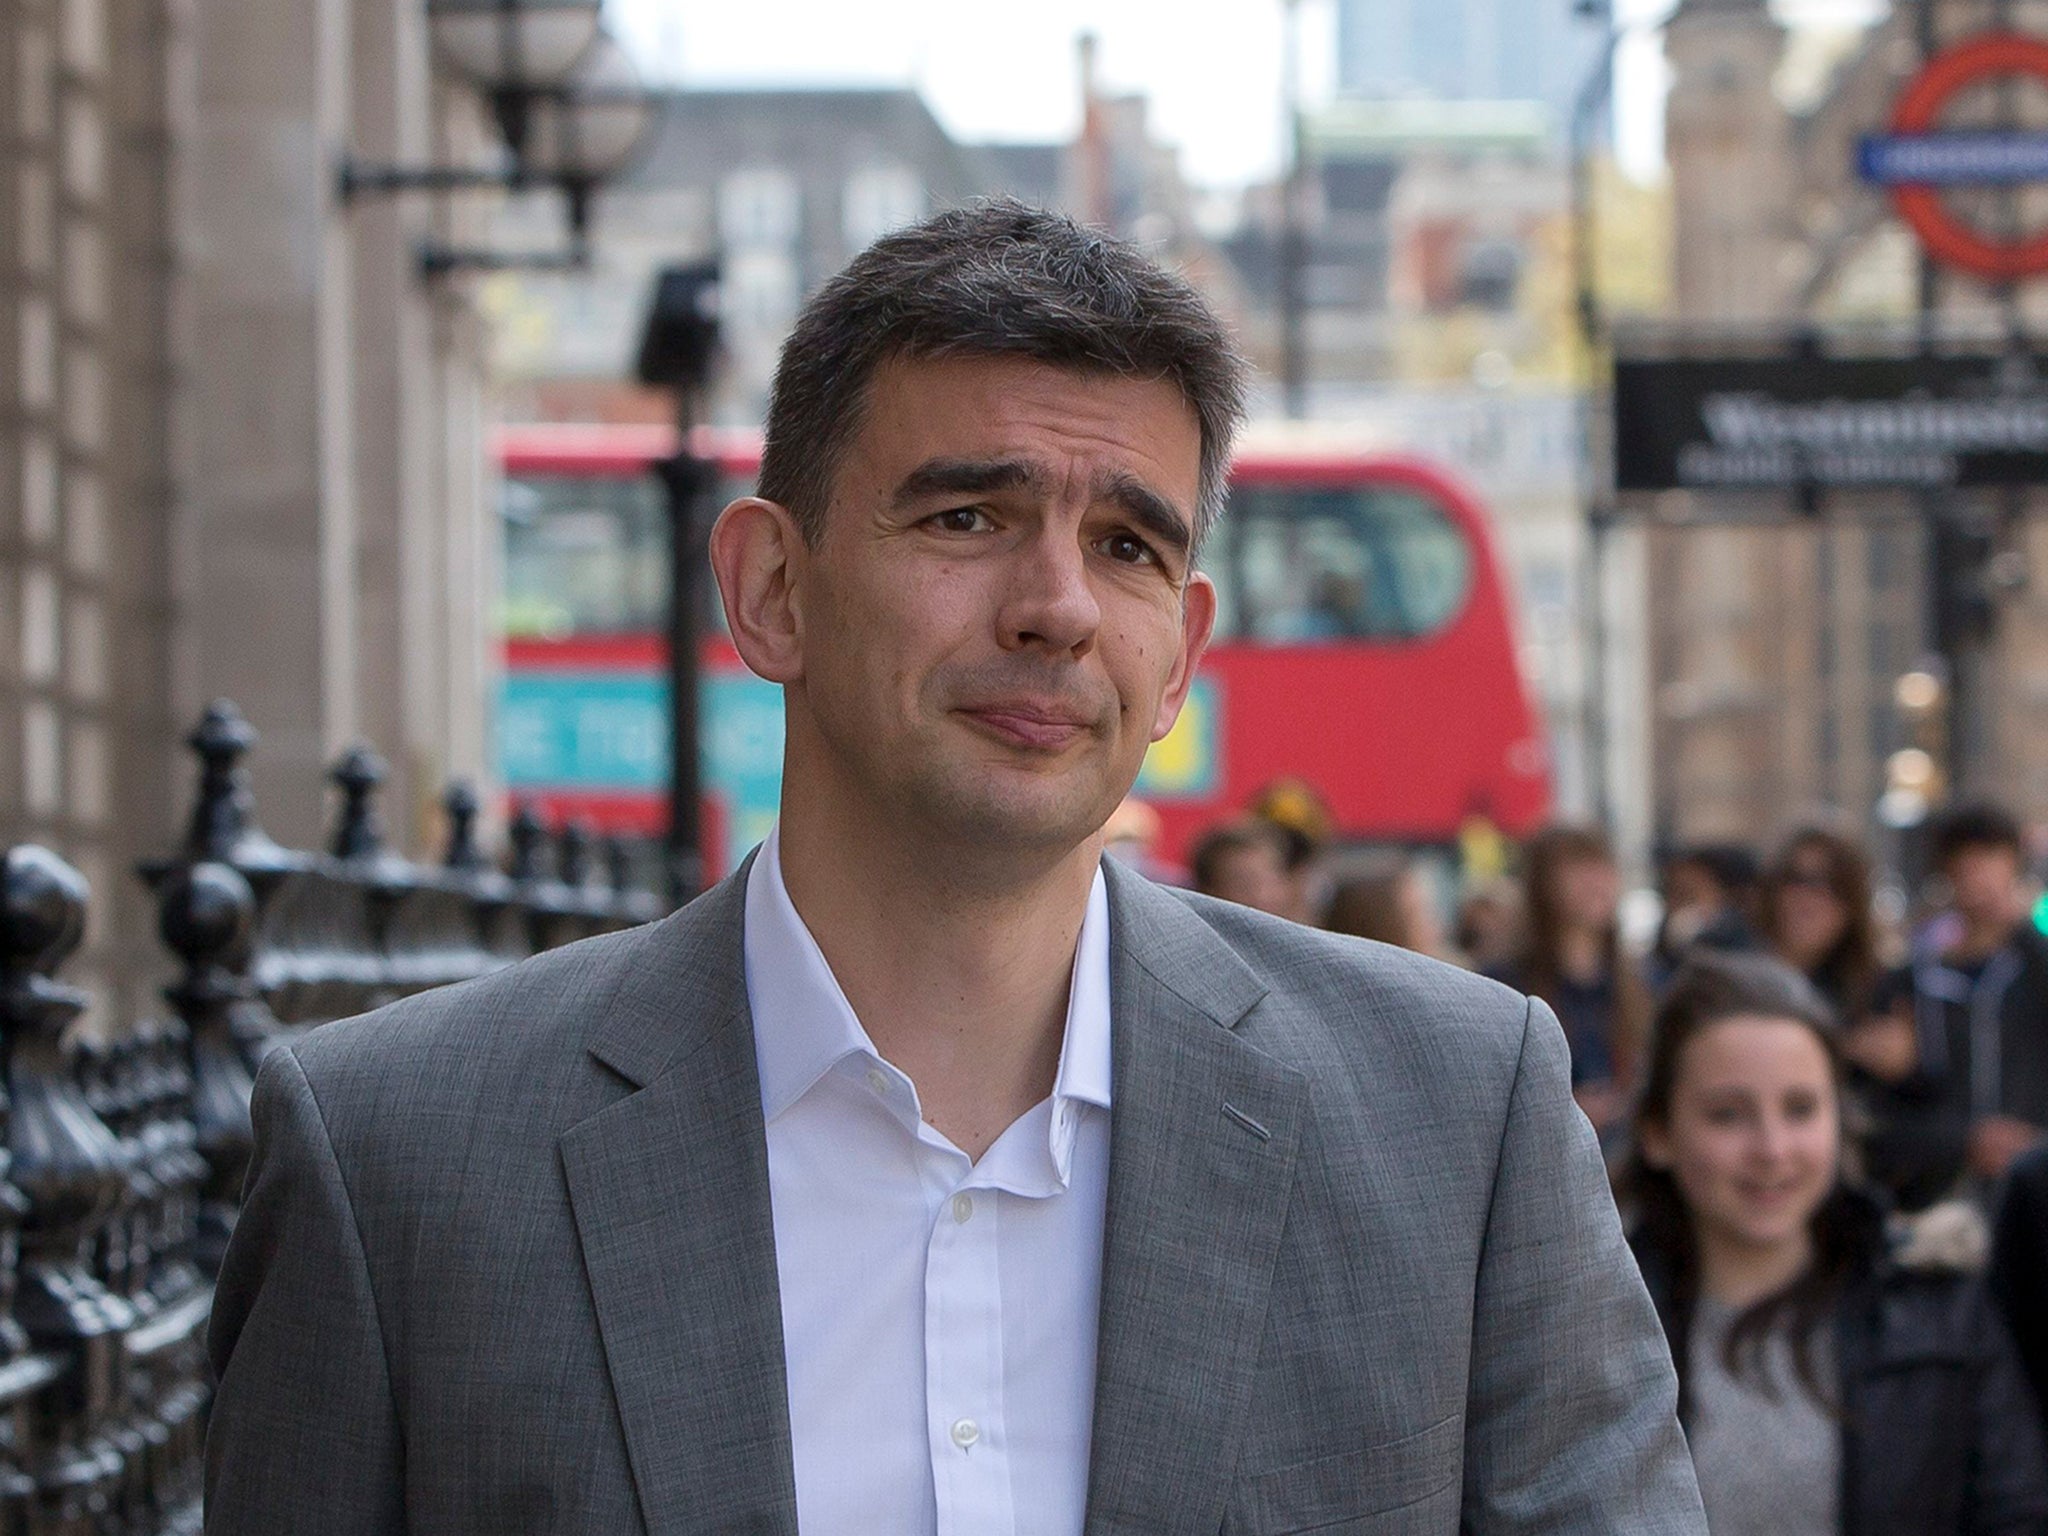 Google's Northern Europe boss Matt Brittin leaves a British parliamentary Public Accounts Committee inquiry into tax avoidance at Portcullis House in London